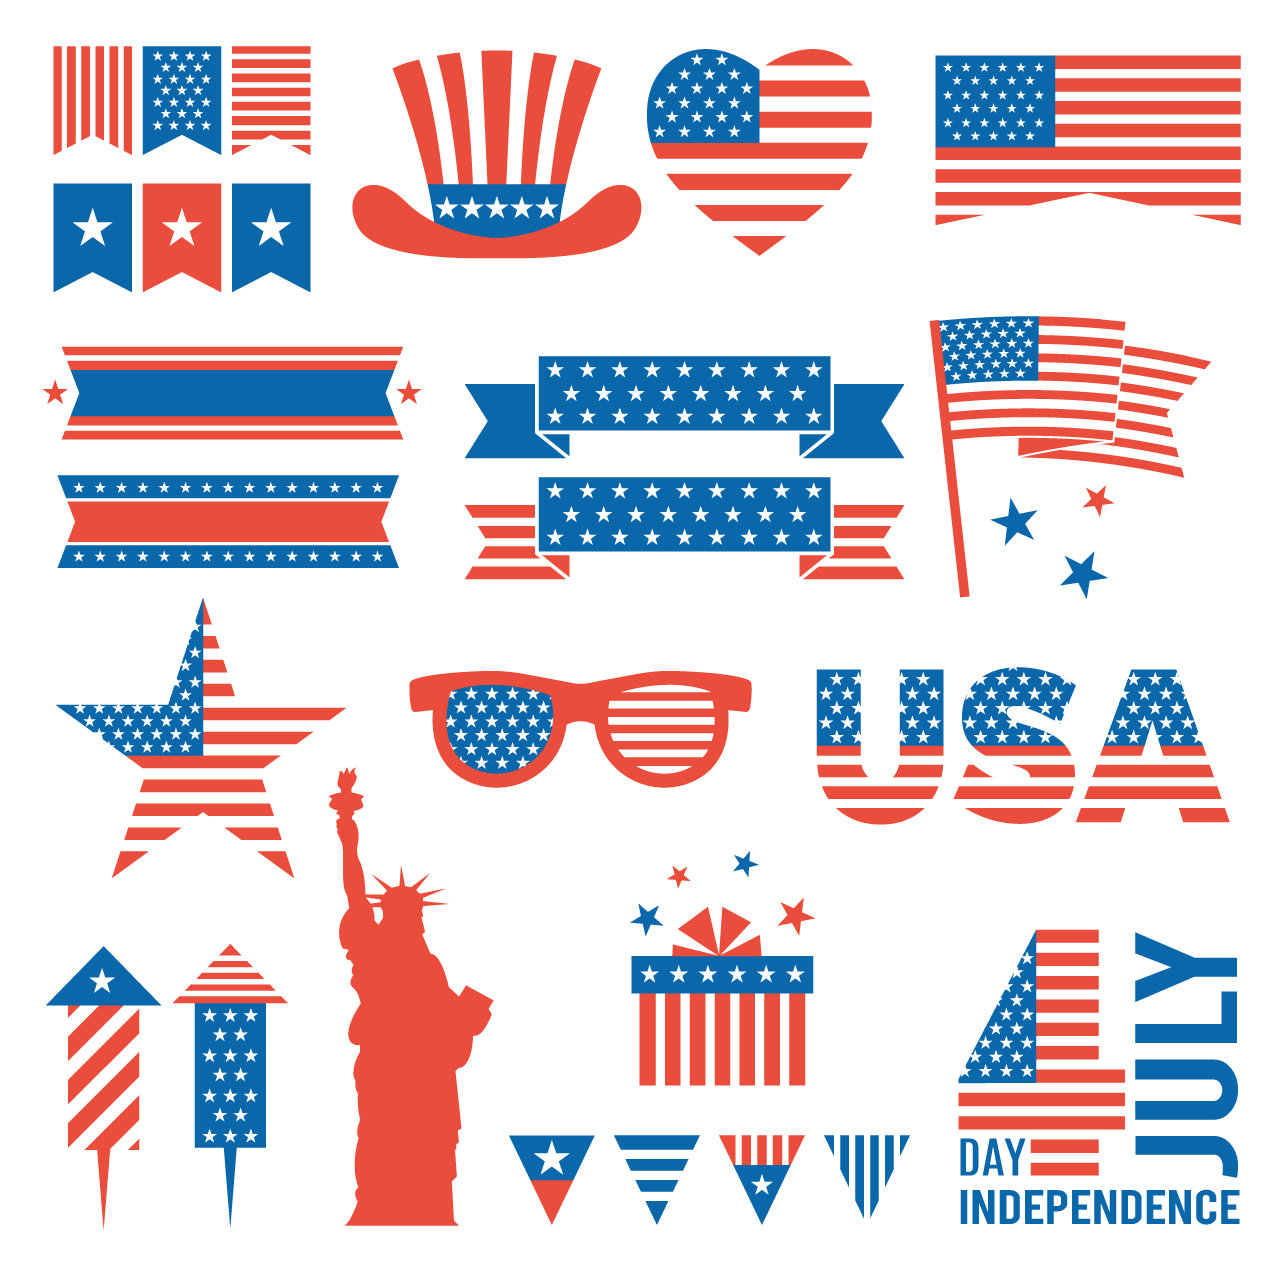 Ribbon banner clipart usa independence day design elements 4 july independence day